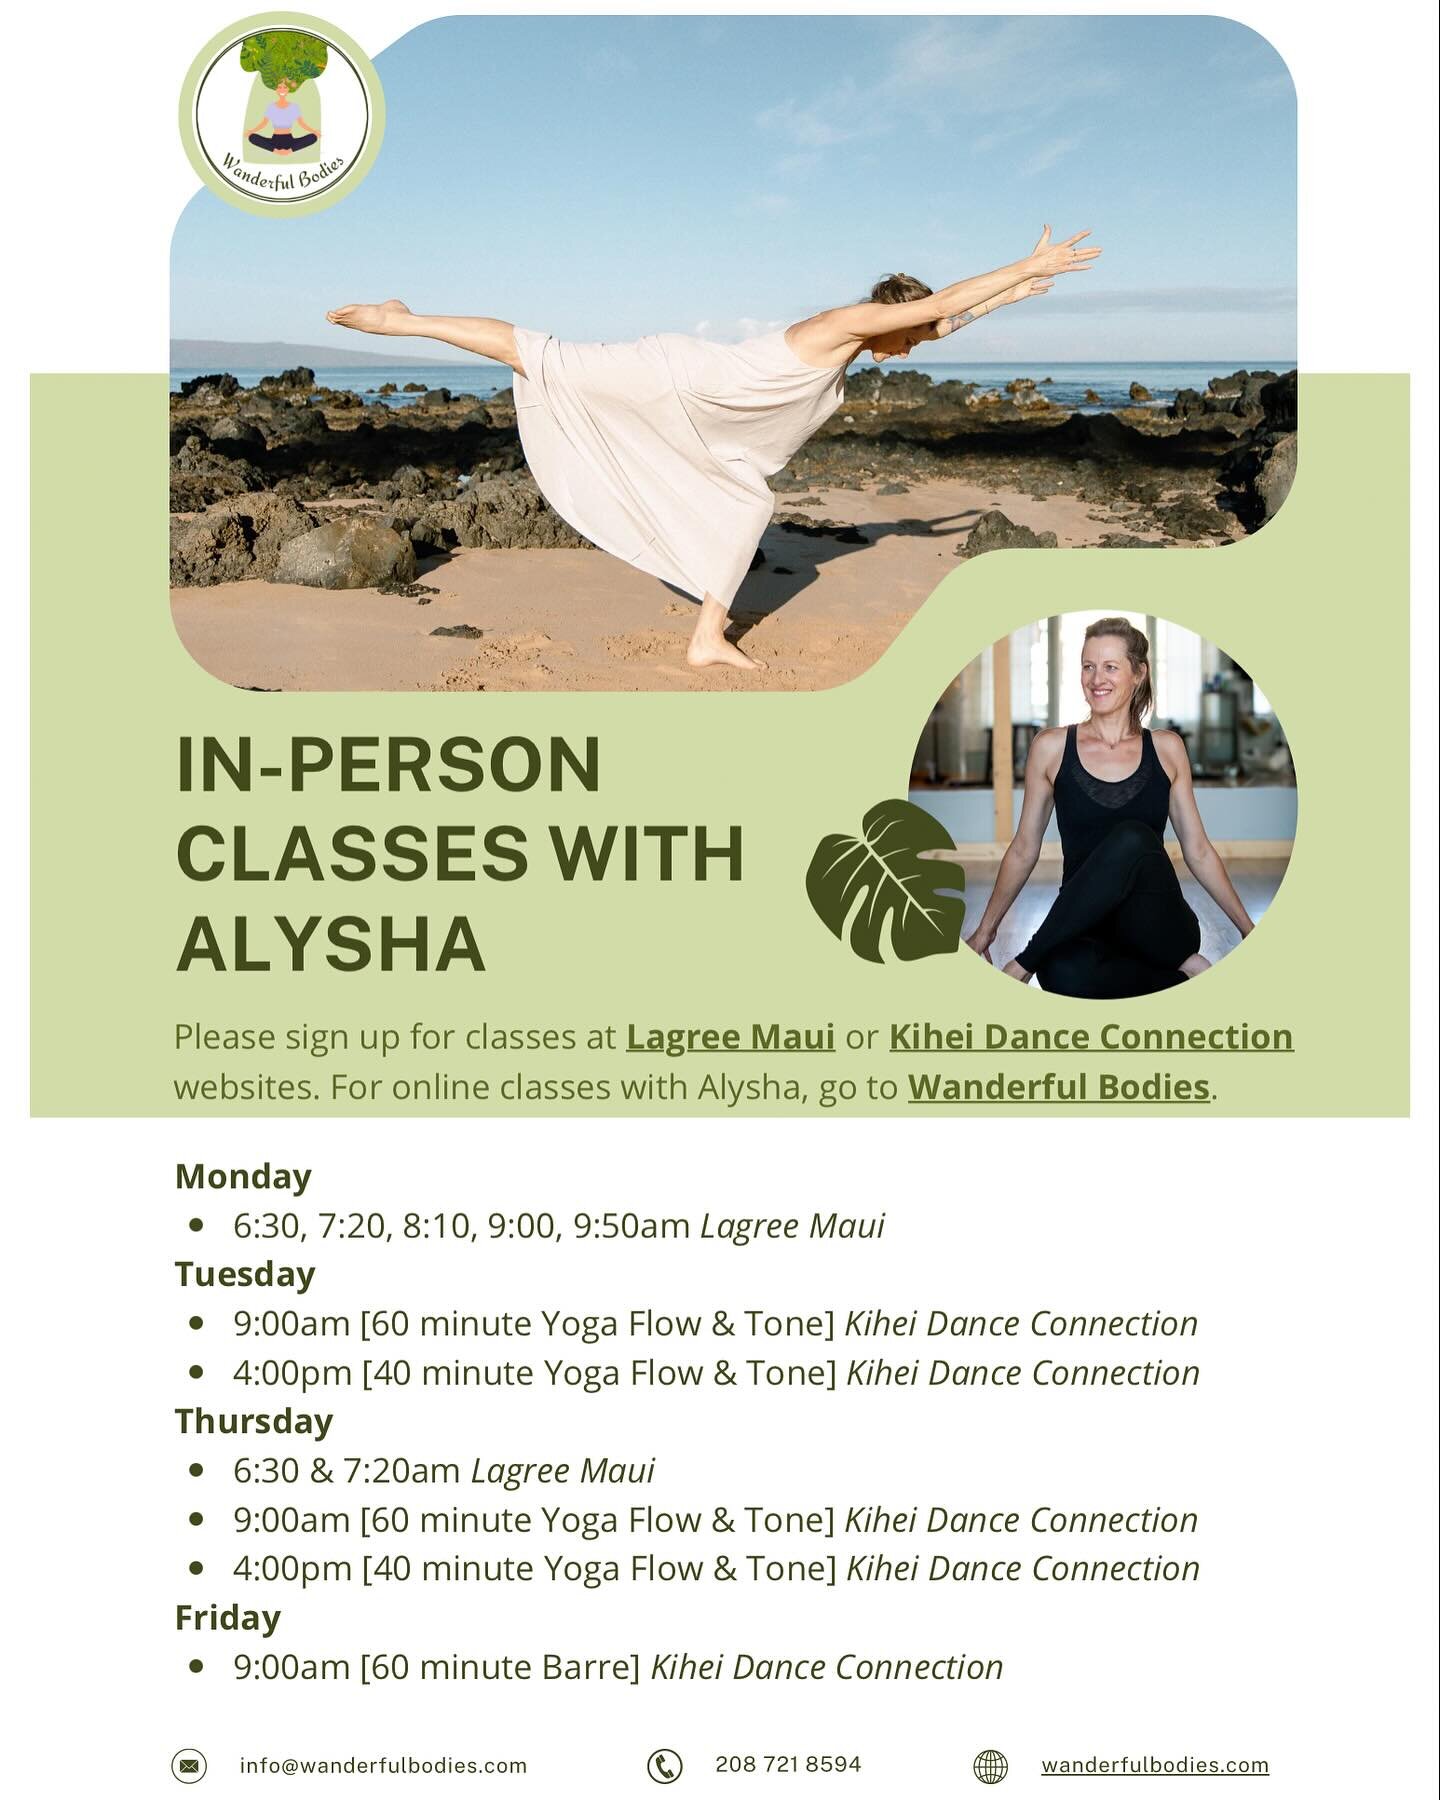 You can now take those fantastic Wanderful Bodies classes in person! Here&rsquo;s Alysha&rsquo;s live schedule on Maui. 😊

#moveonmaui #yogaonmaui #pilatesonmaui #pilatesinparadise  #wanderfulbodies ##keepmovingmaui
#staystrongmaui #